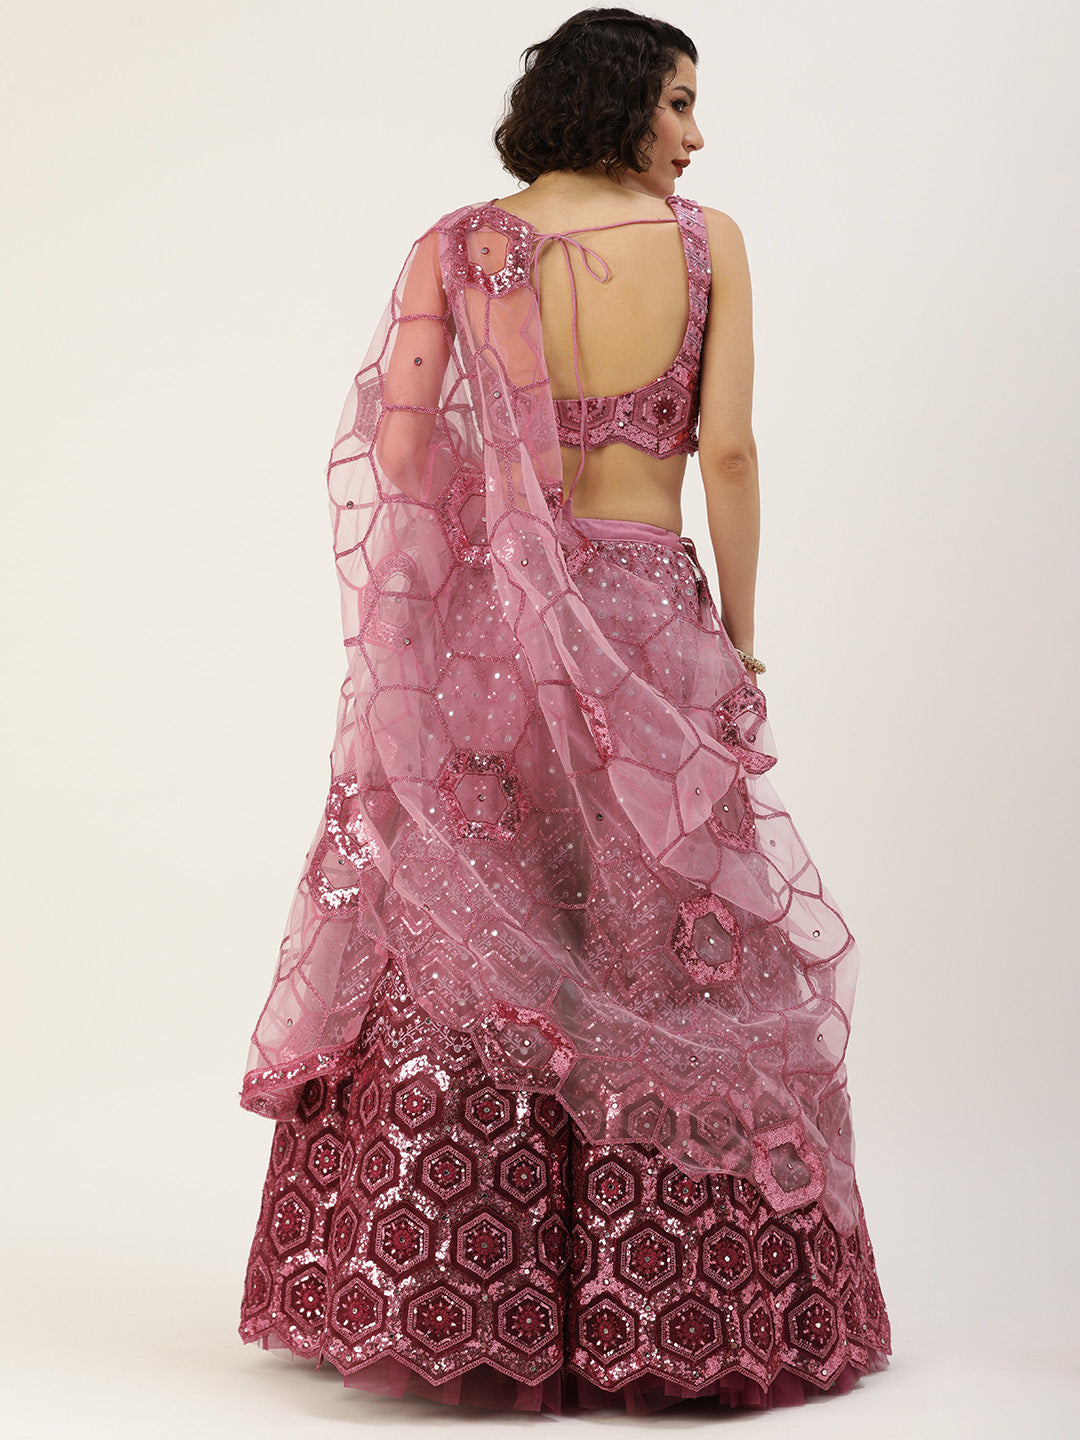 Women's Burgundy Shading Net Sequince Embroidered Lehenga & Blouse With Dupatta - Royal Dwells